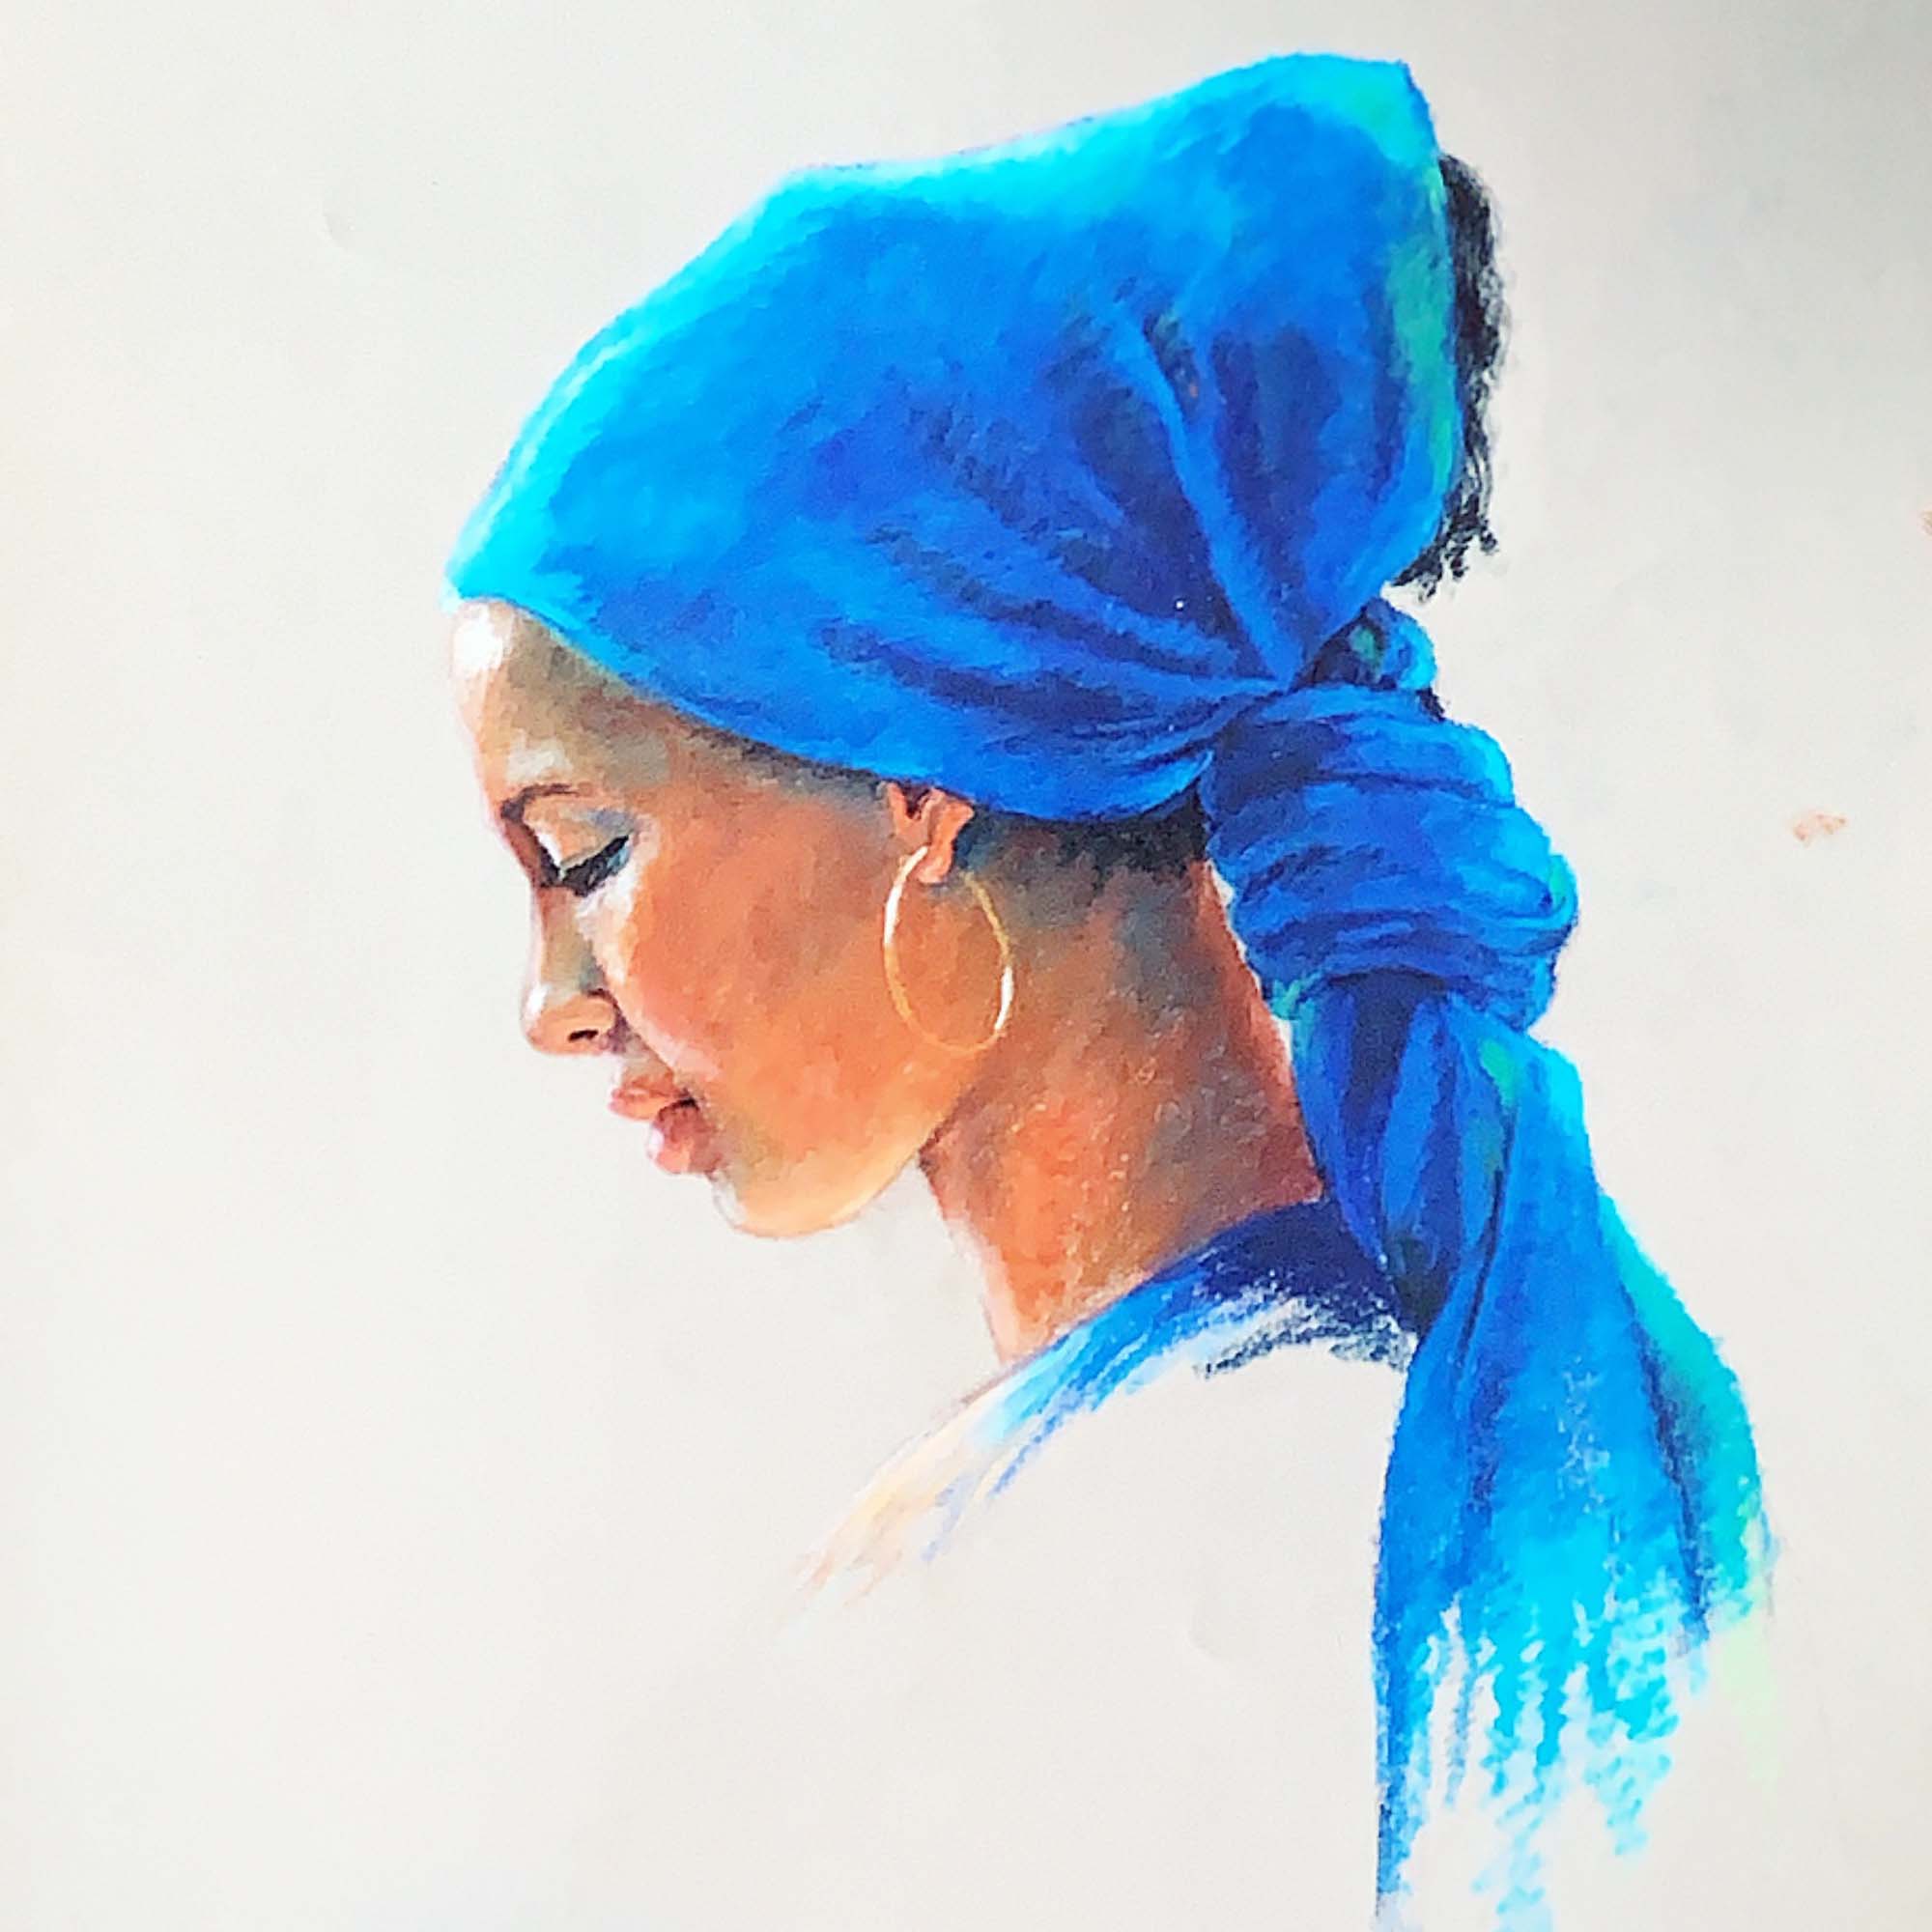 Pictures of a woman in a blue headress.